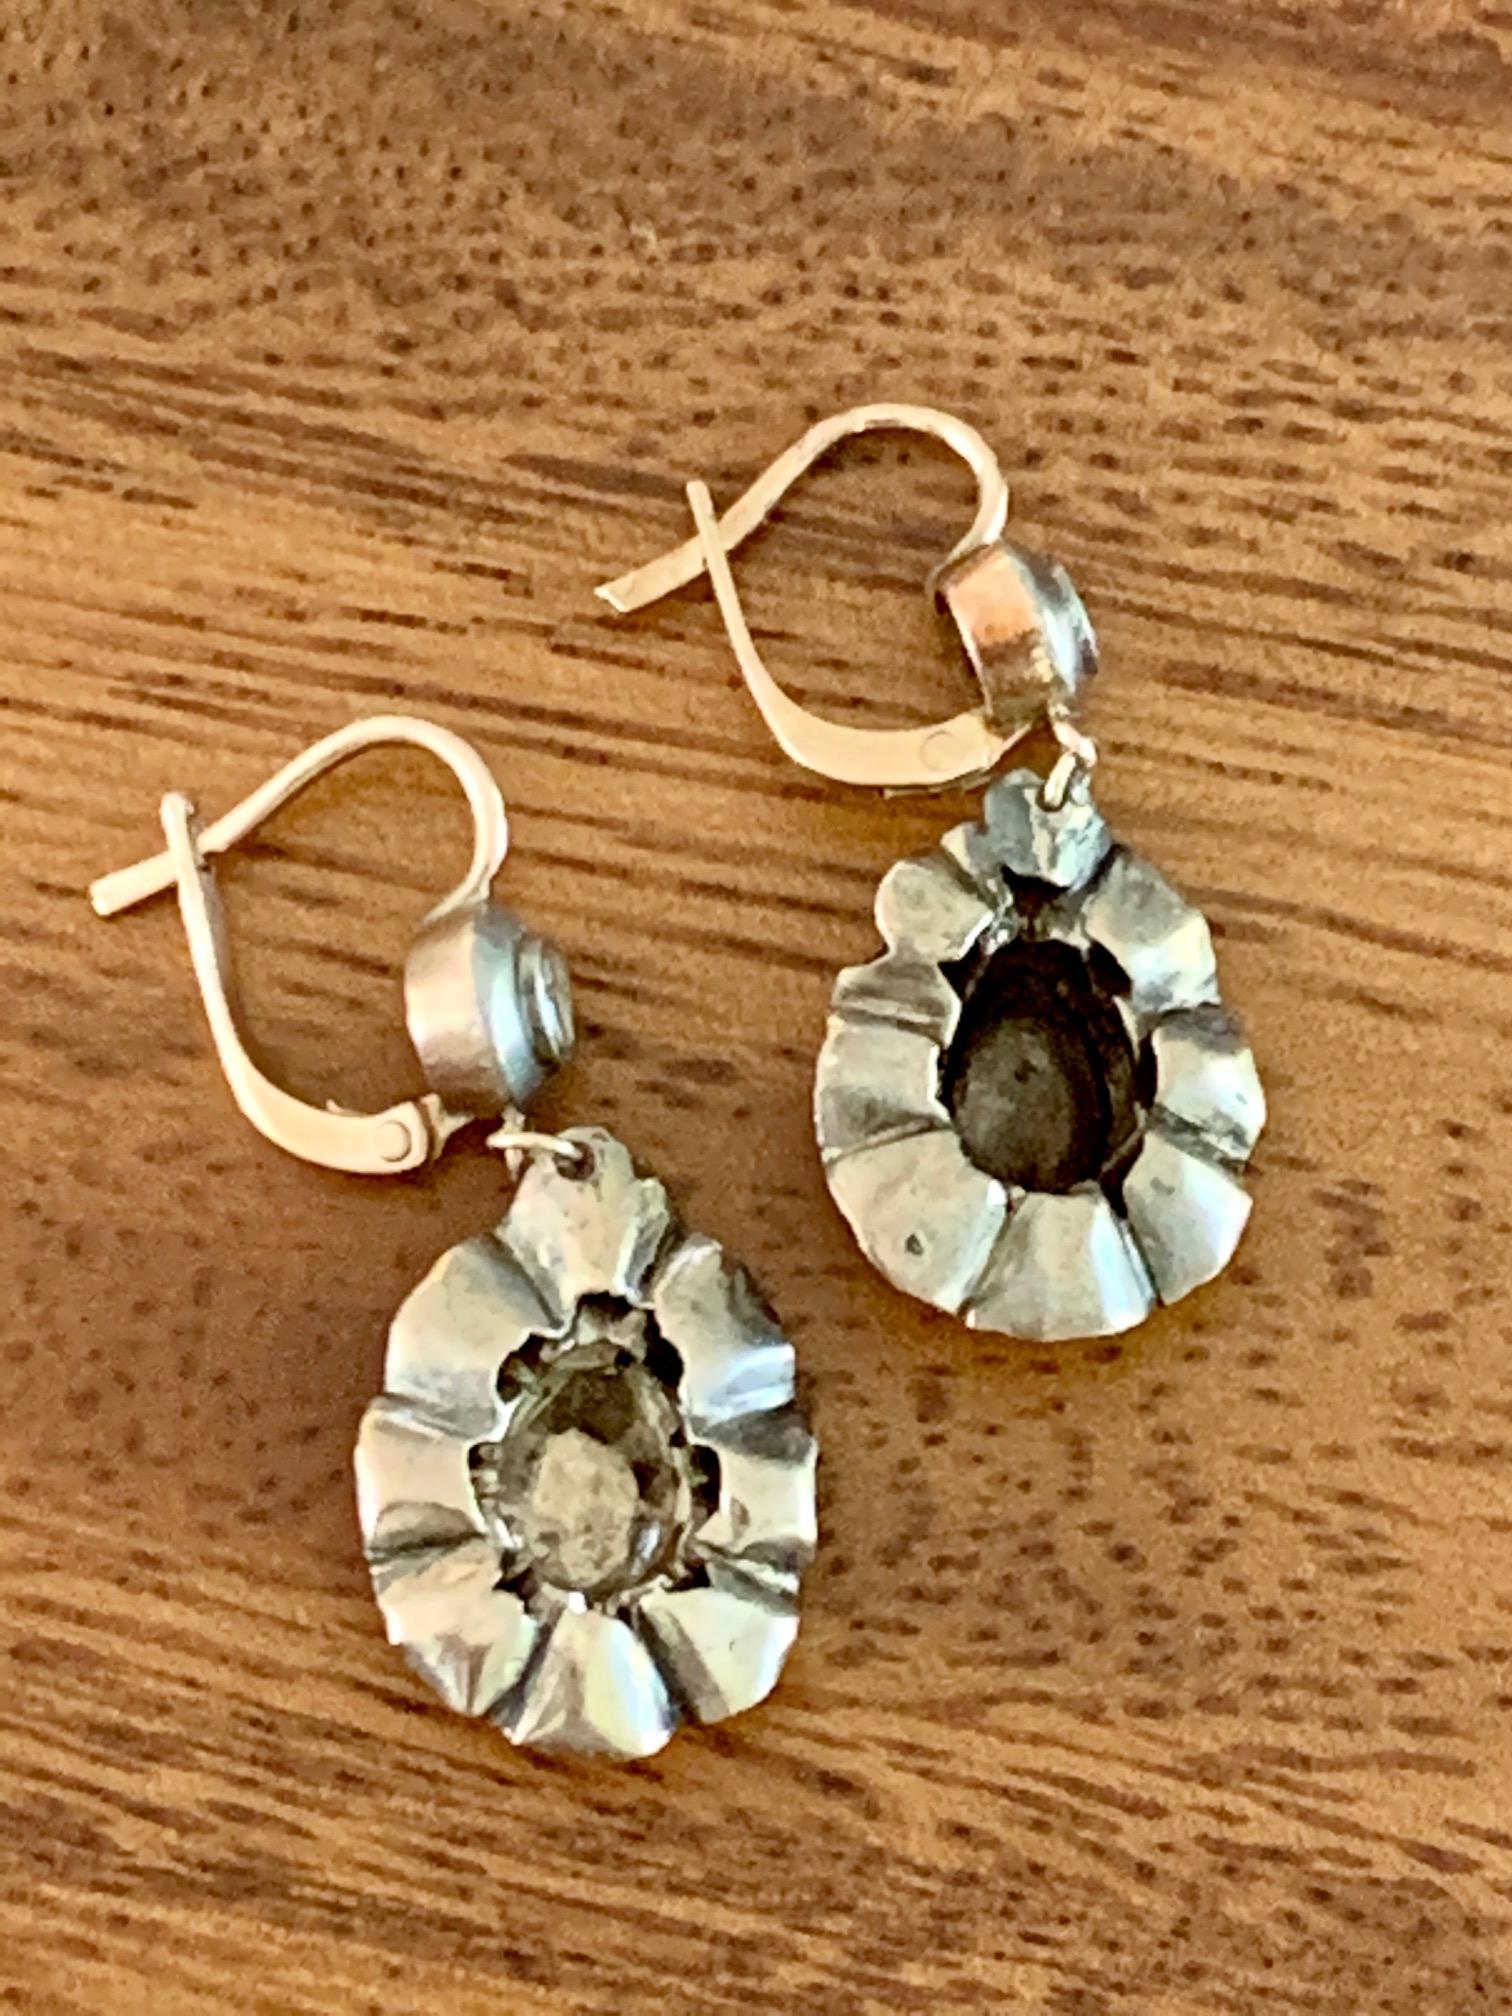 Antique Rose Cut Diamond 9 Karat Gold and Silver Drop French Hook Earrings In Good Condition For Sale In St. Louis Park, MN